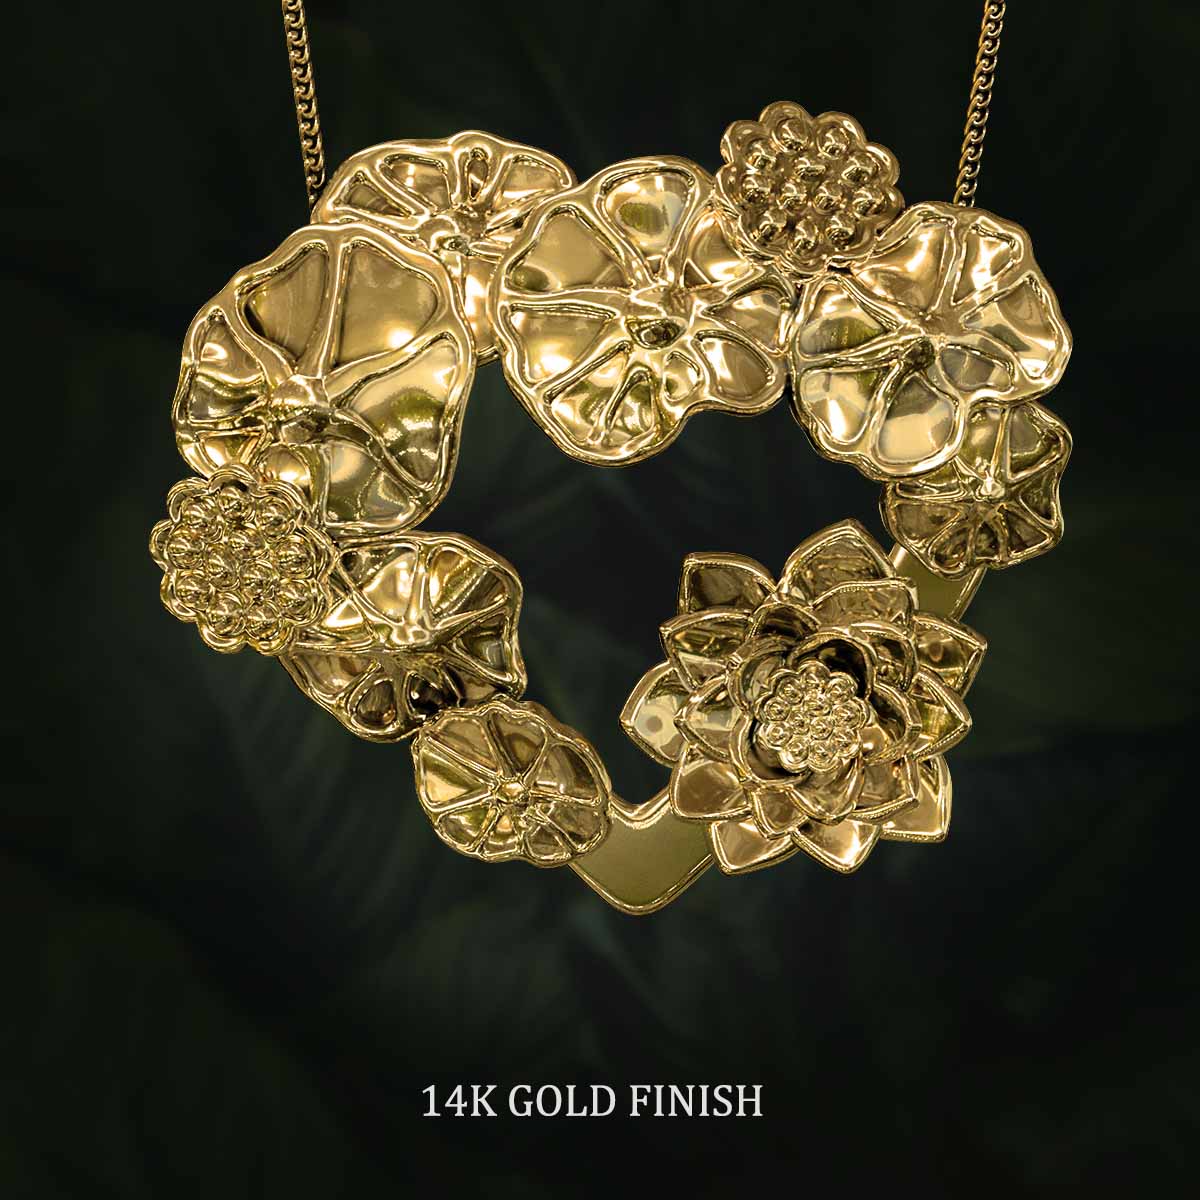 14k-Gold-Finish-Lotus-Leaves-with-Flower-and-Seed-Pods-Pendant-Jewelry-For-Necklace